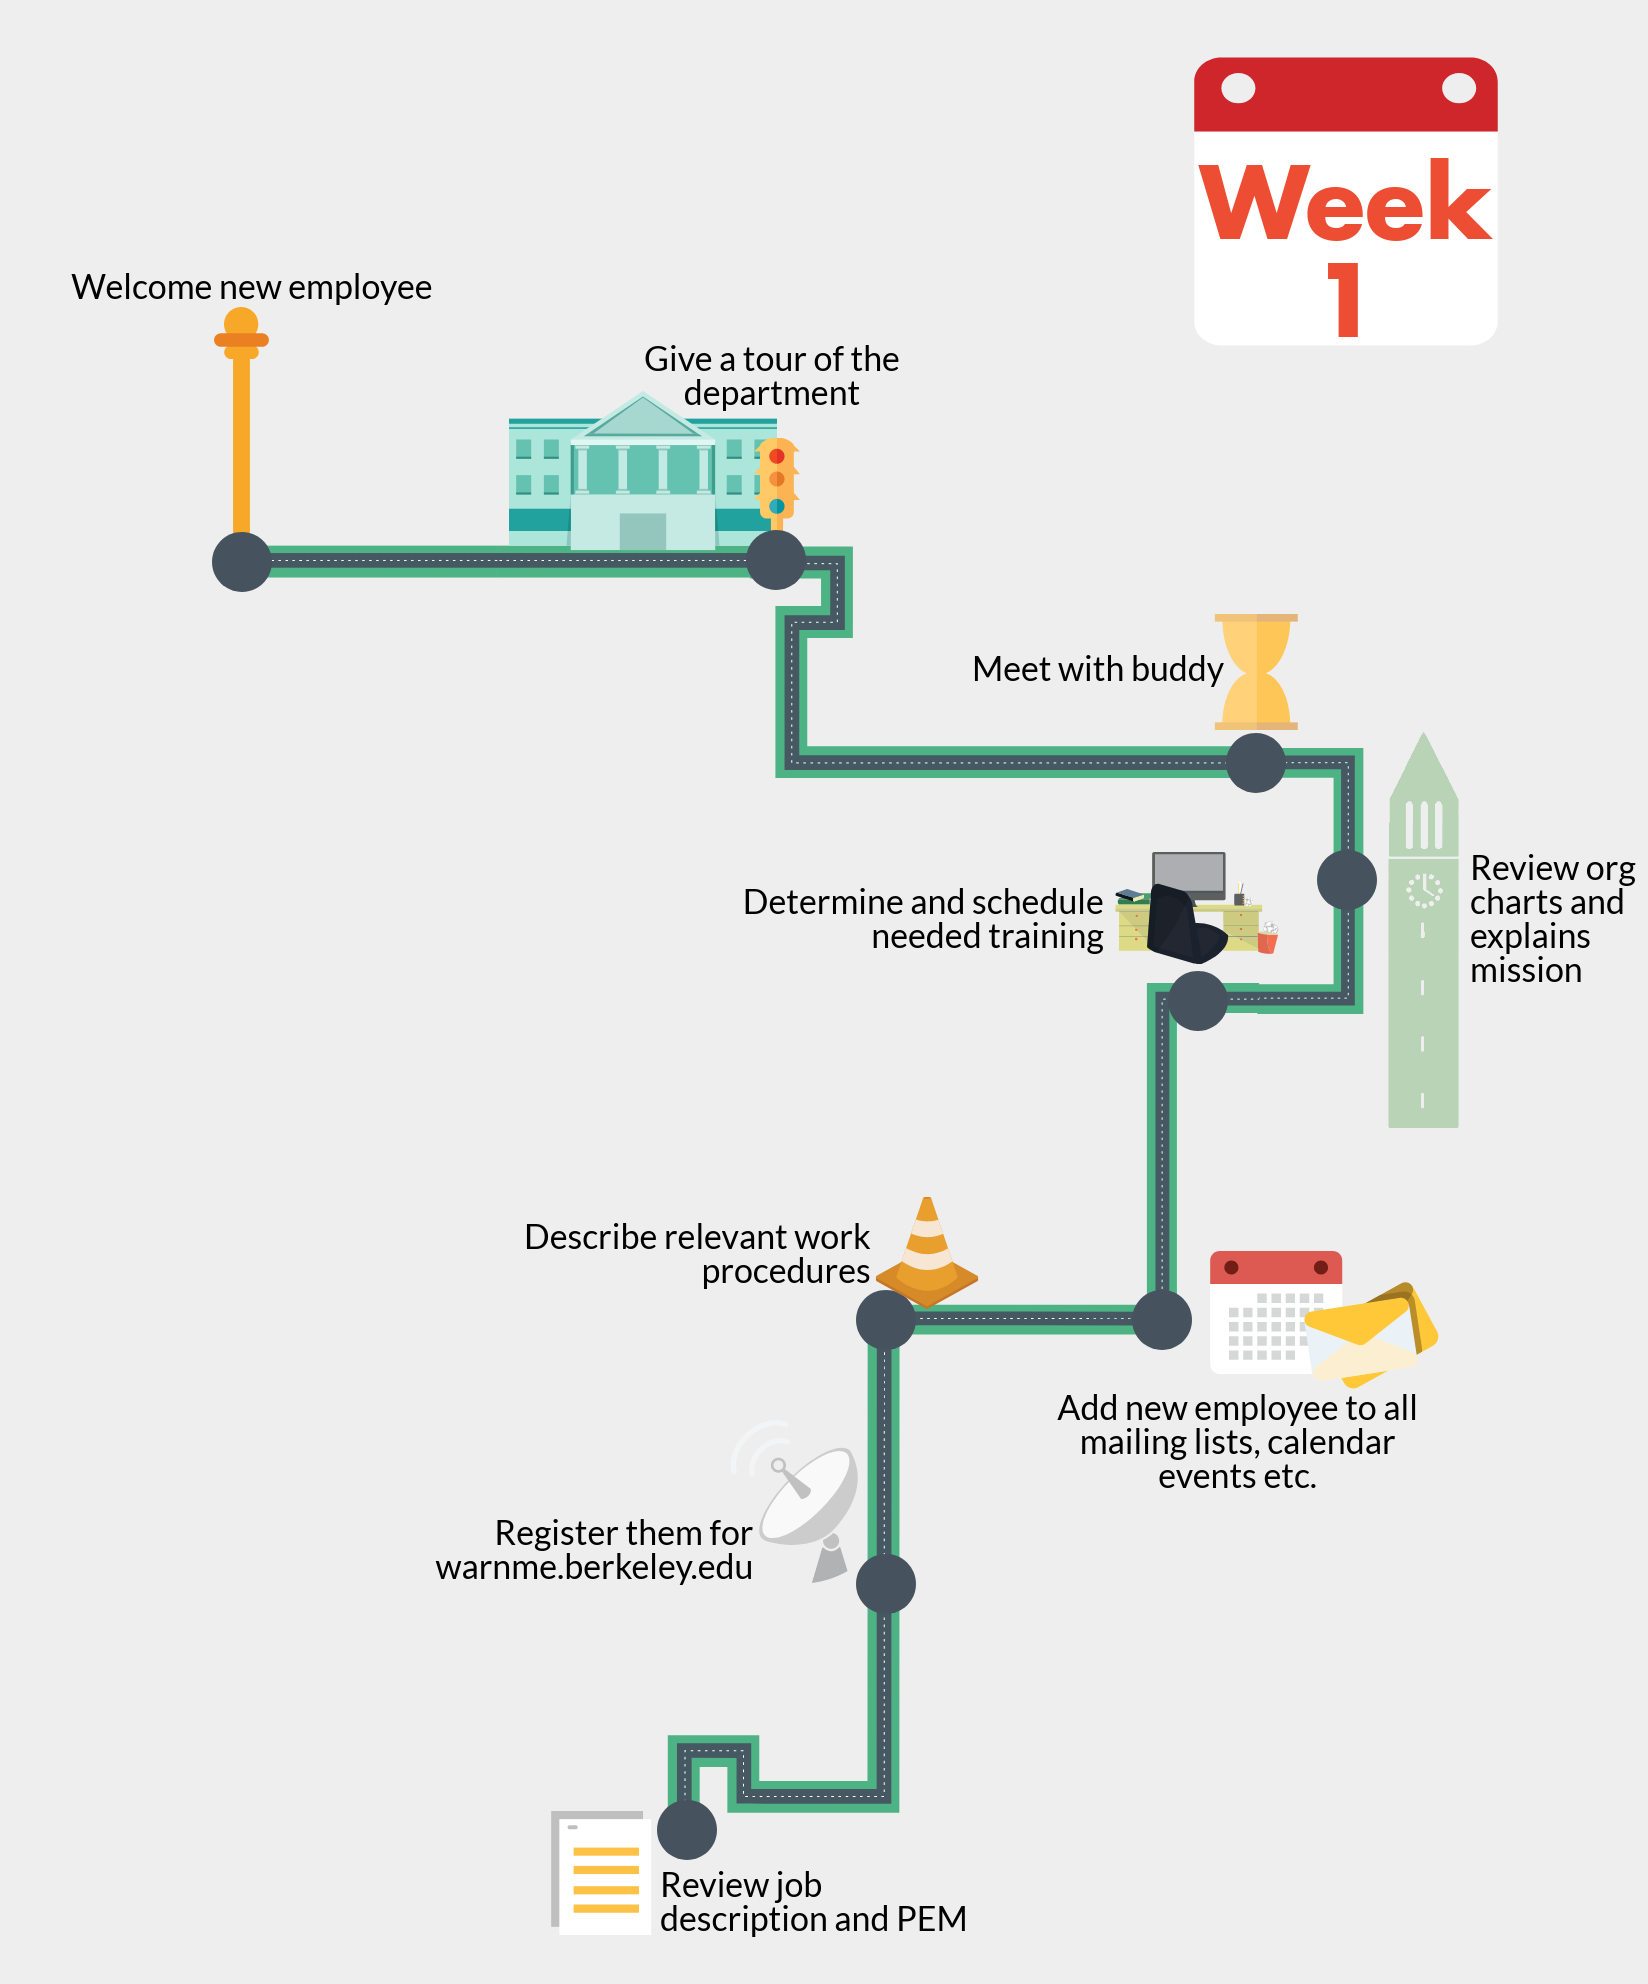 Onboarding timeline map illustrating the tasks to complete in the first week on the job, as described below.